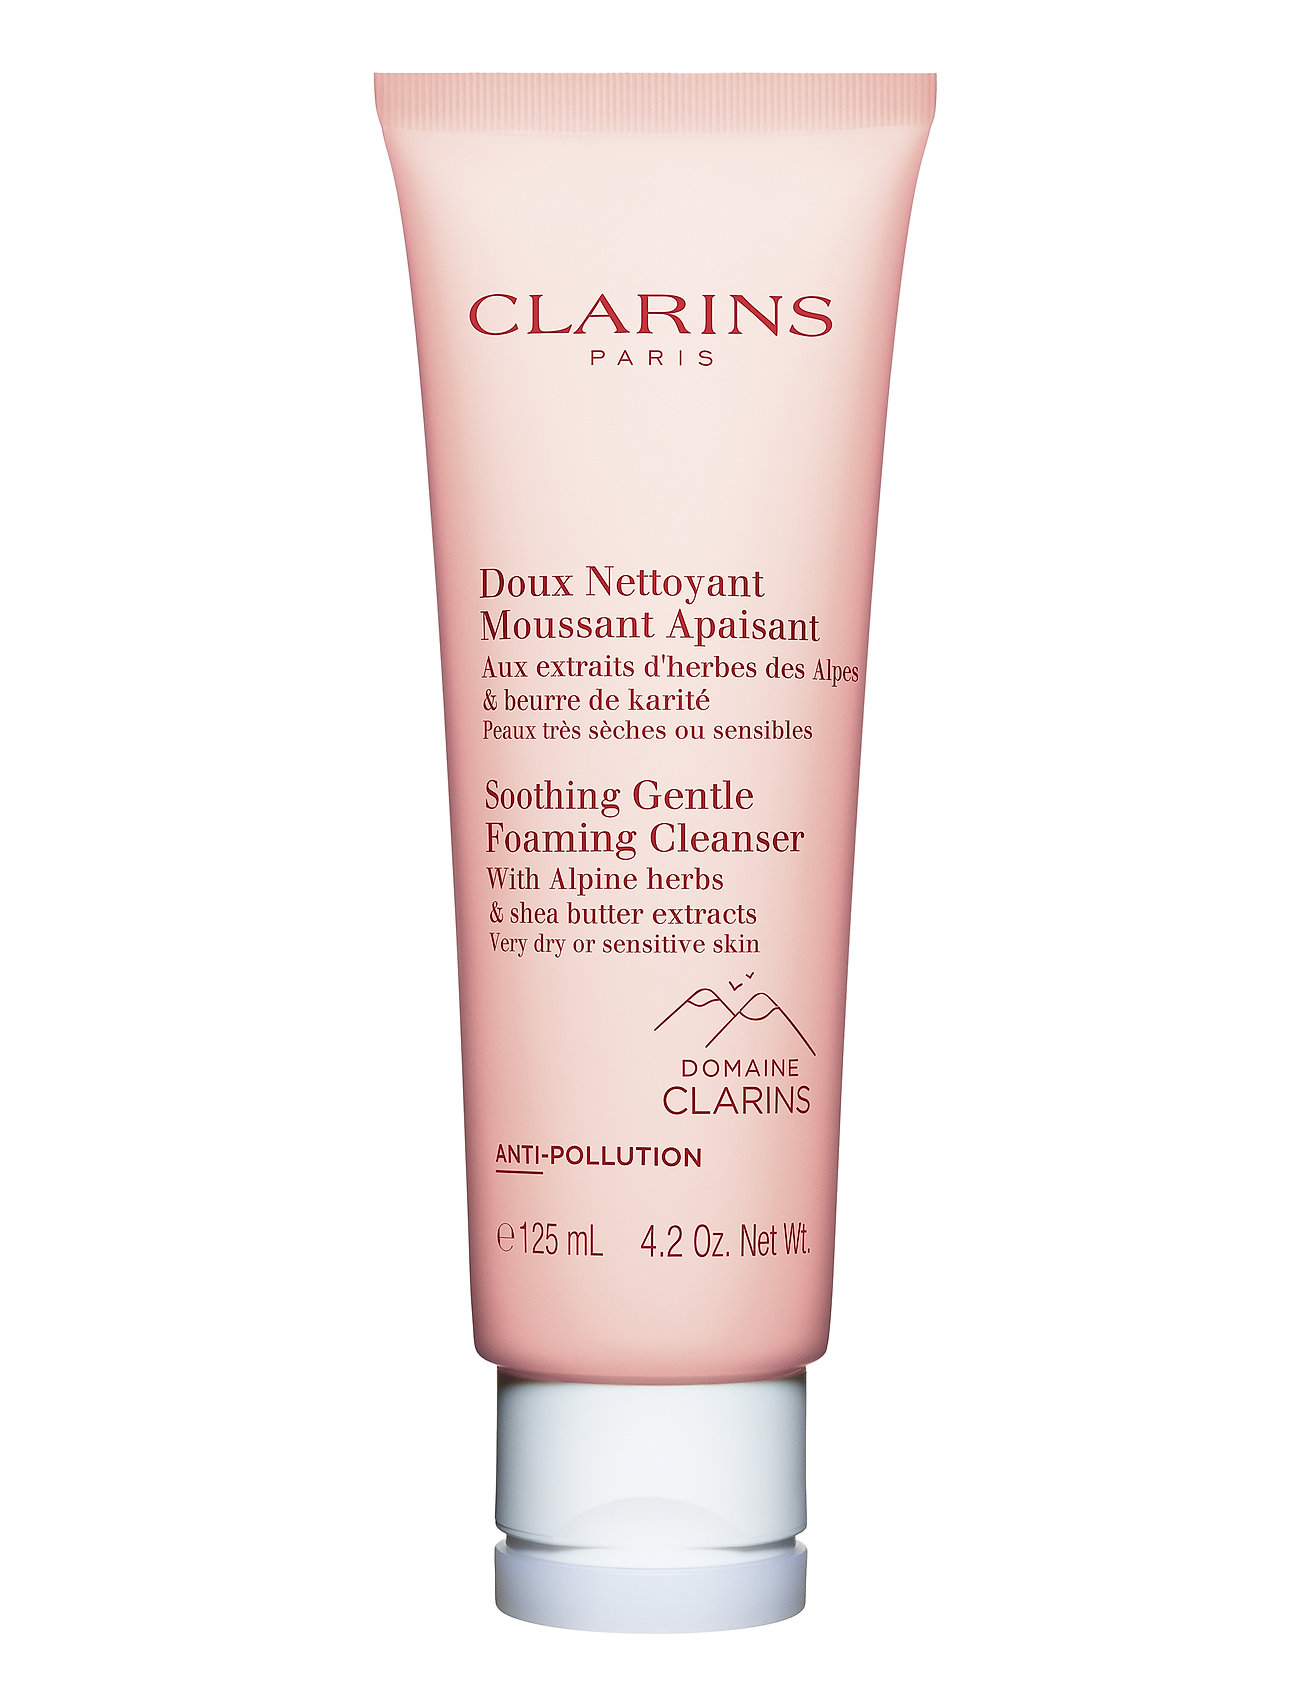 Soothing Gentle Foaming Cleanser Beauty Women Skin Care Face Cleansers Mousse Cleanser Nude Clarins